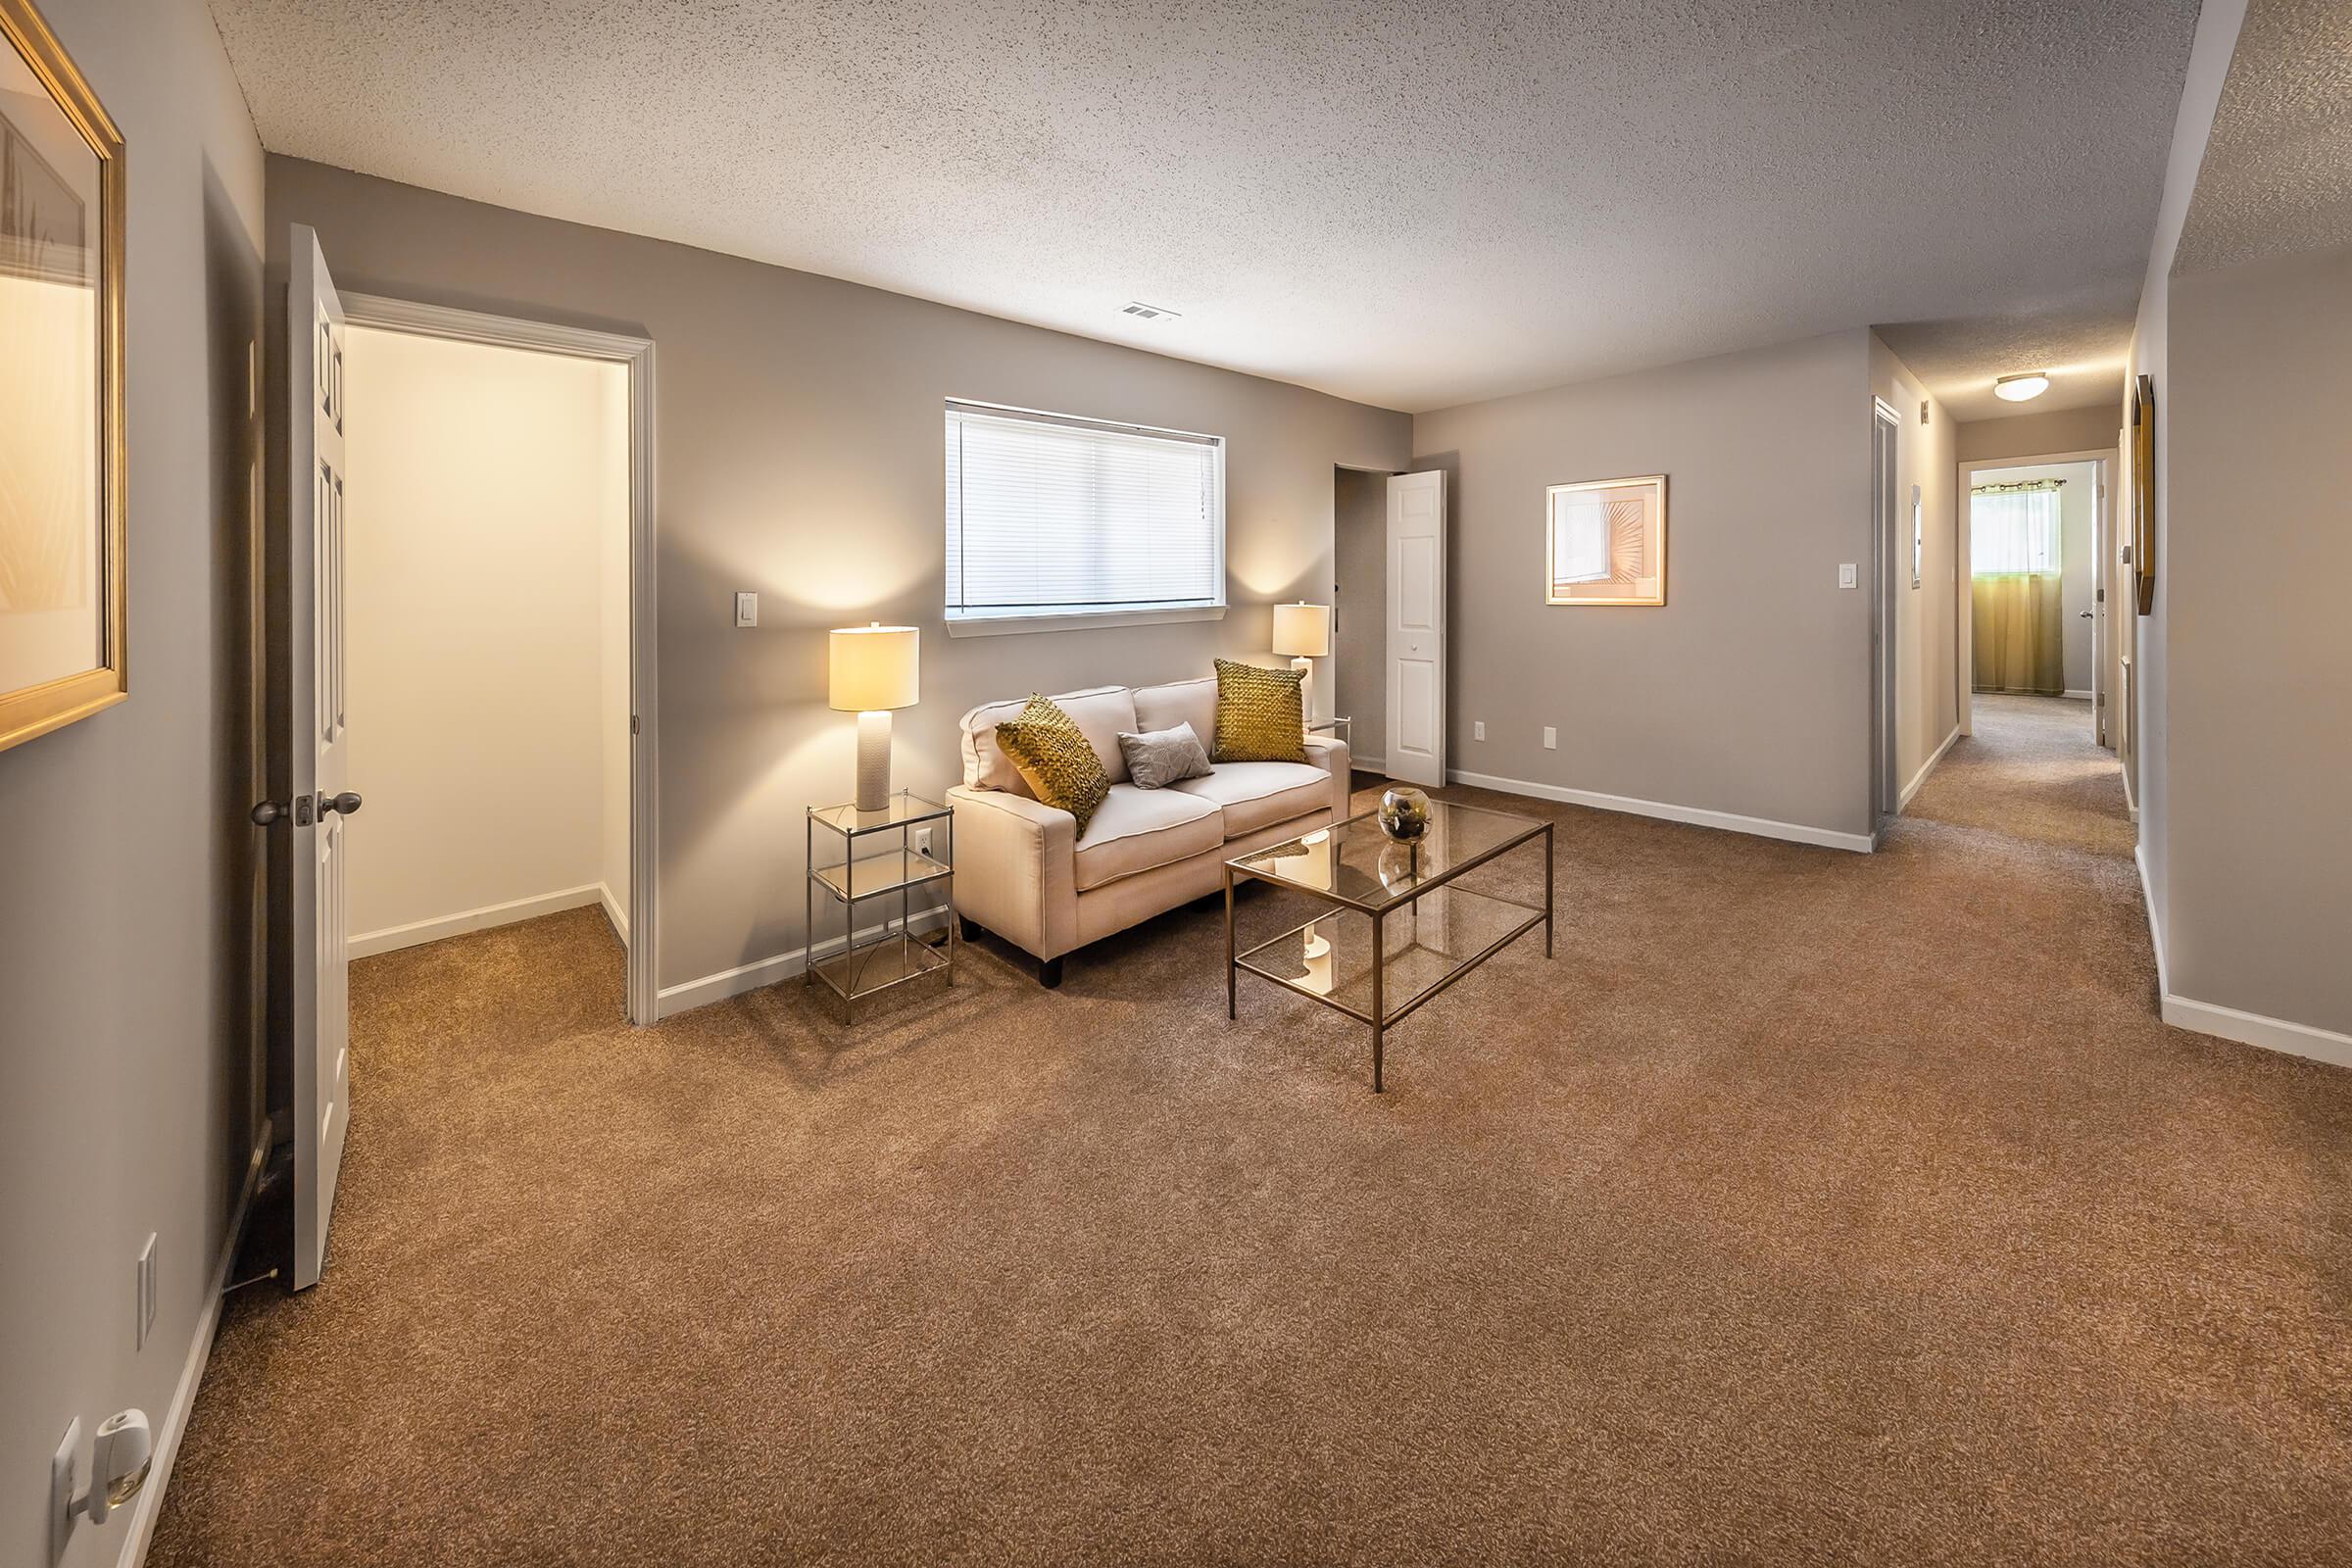 SPACIOUS ONE, TWO, AND THREE BEDROOM APARTMENTS FOR RENT IN INDIANAPOLIS, IN